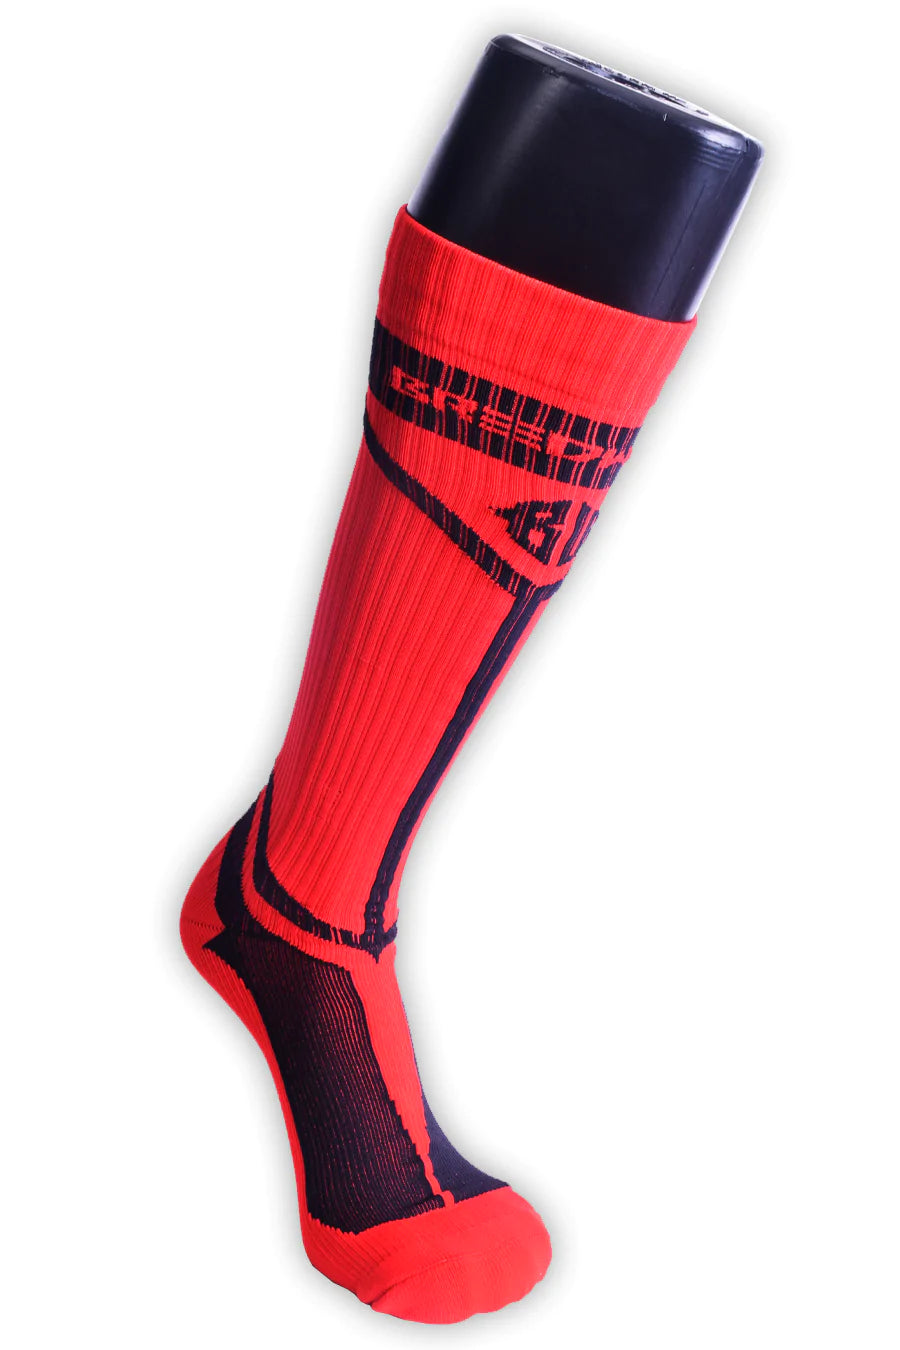 A mannequin leg wearing a red Hybred Sock.